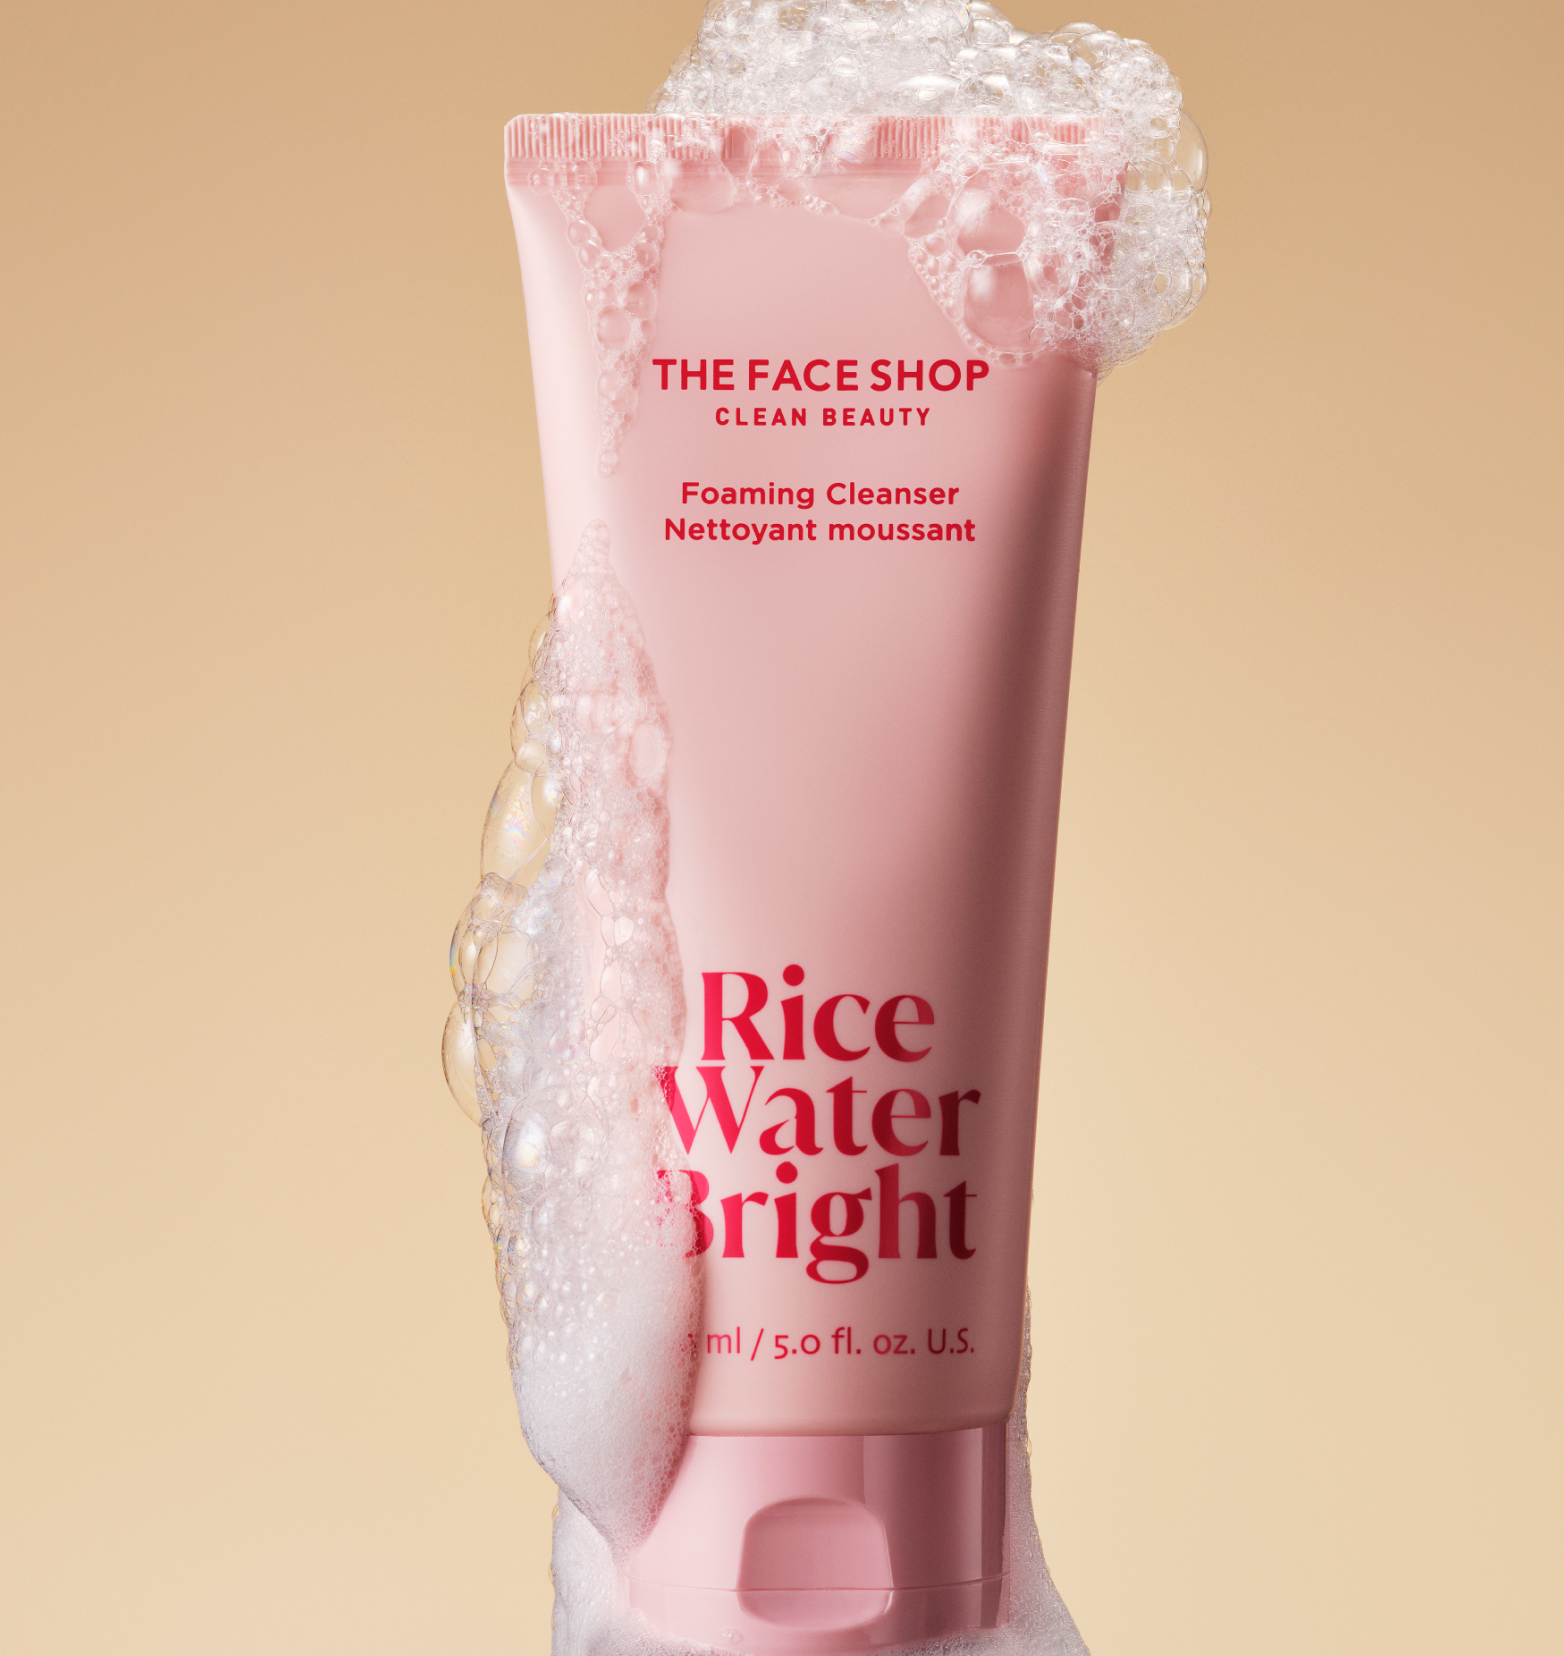 A tube of the face shop rice water bright cleansing foam covered in bubbles is displayed on a warm beige background.